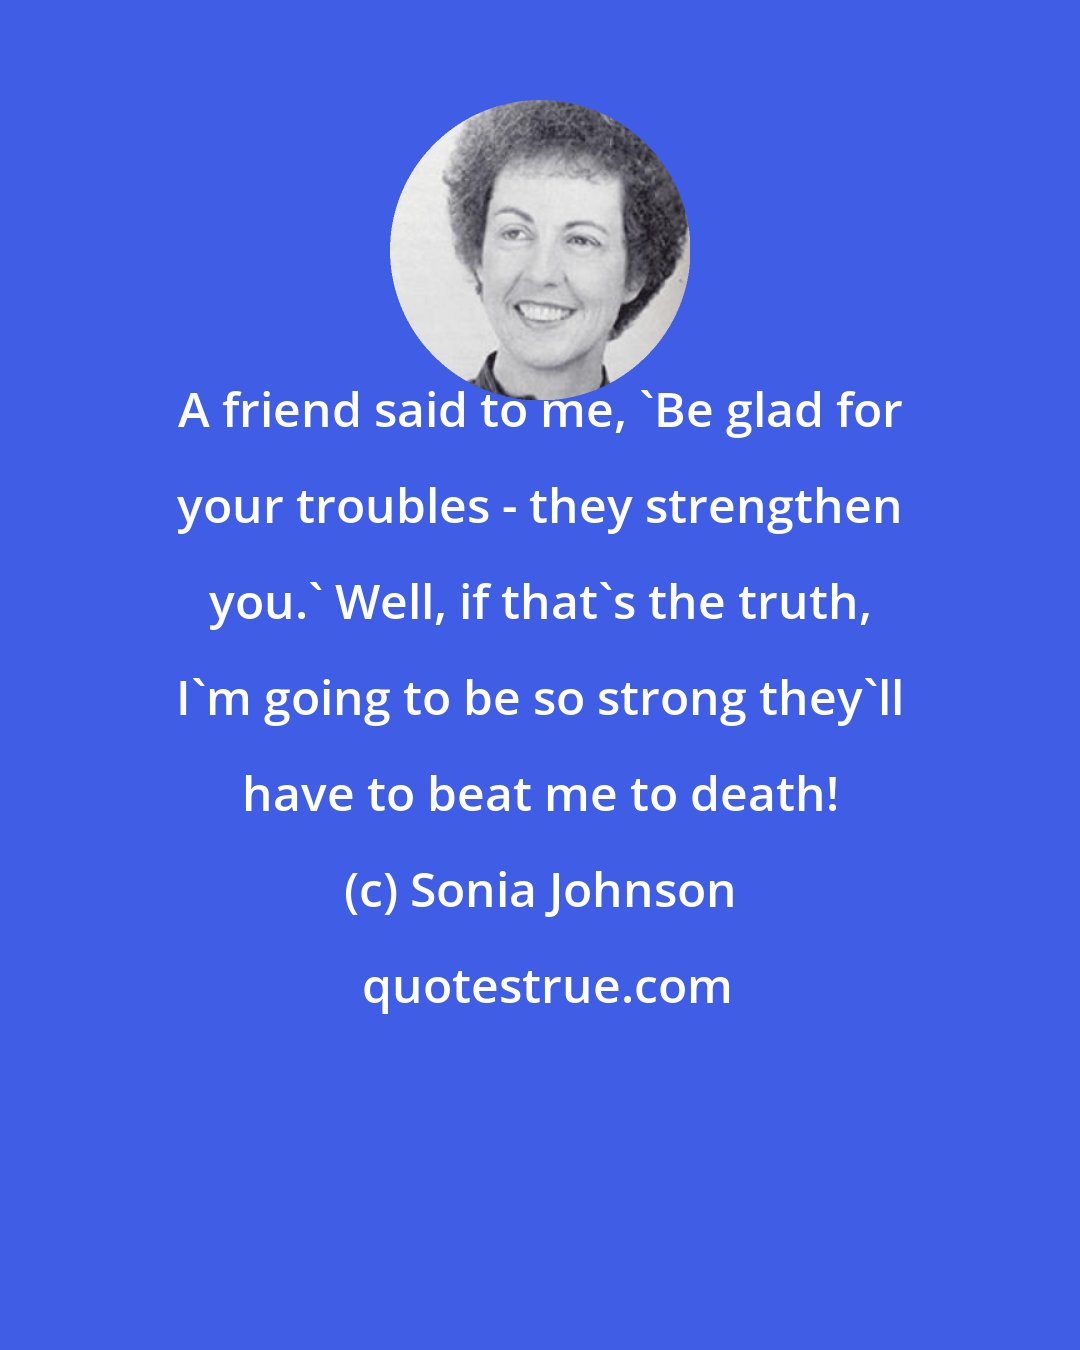 Sonia Johnson: A friend said to me, 'Be glad for your troubles - they strengthen you.' Well, if that's the truth, I'm going to be so strong they'll have to beat me to death!